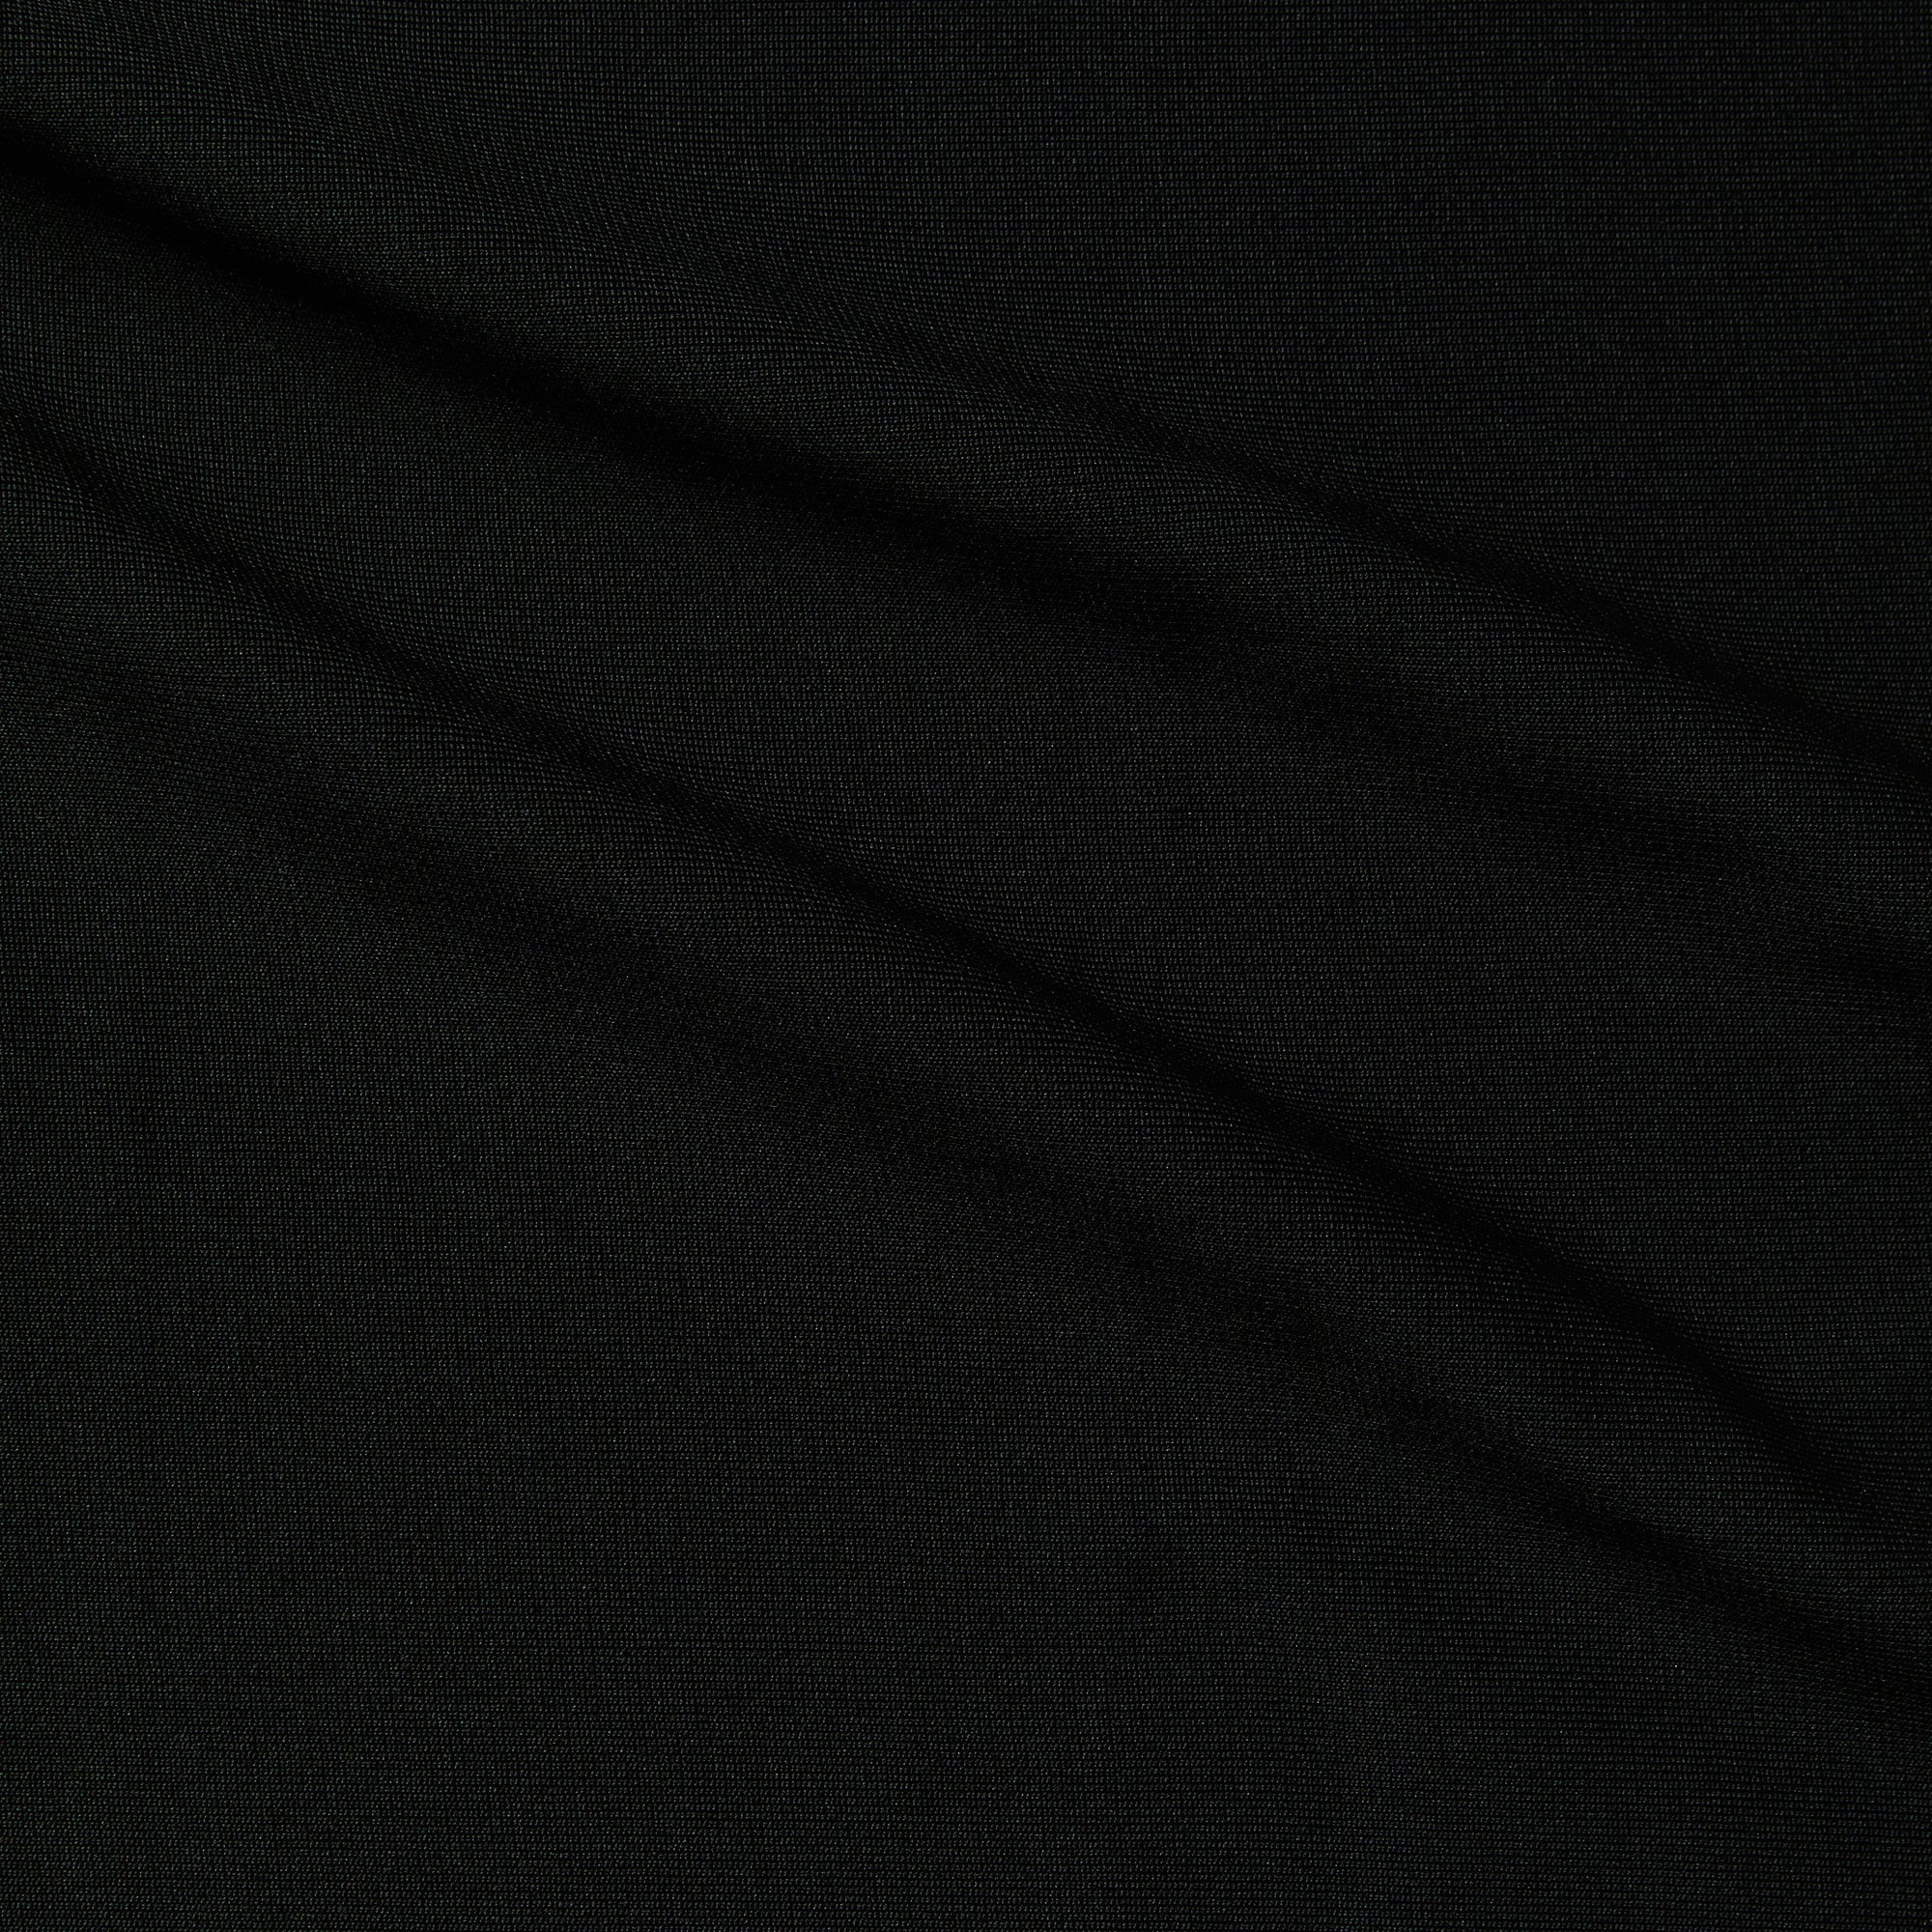 Illustrating custom knit a black colored gutsy heavy weight 2 way stretch polyester blended with spandex